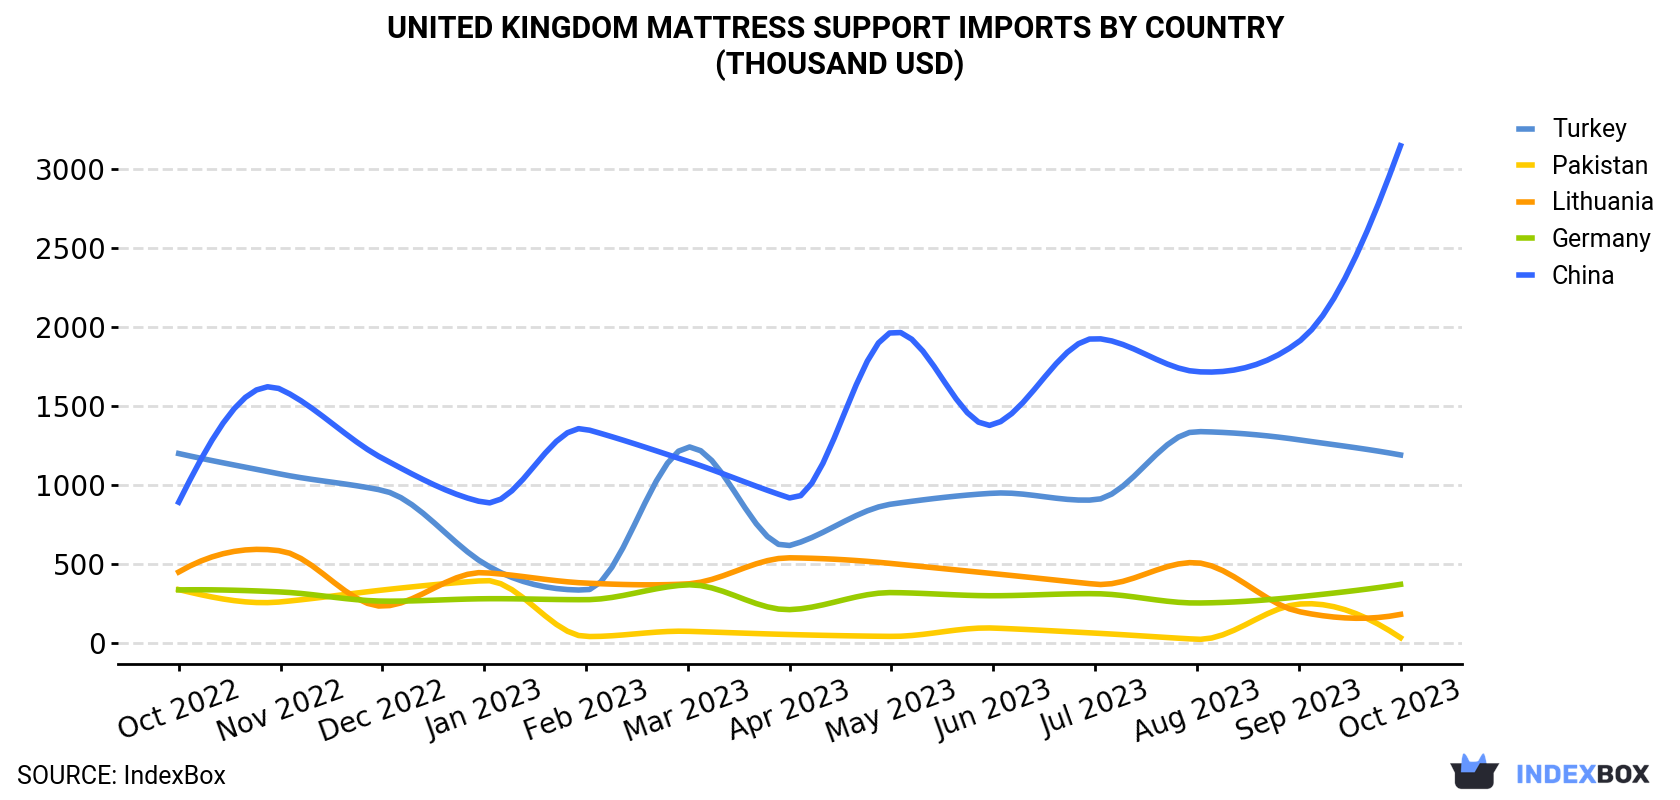 United Kingdom Mattress Support Imports By Country (Thousand USD)